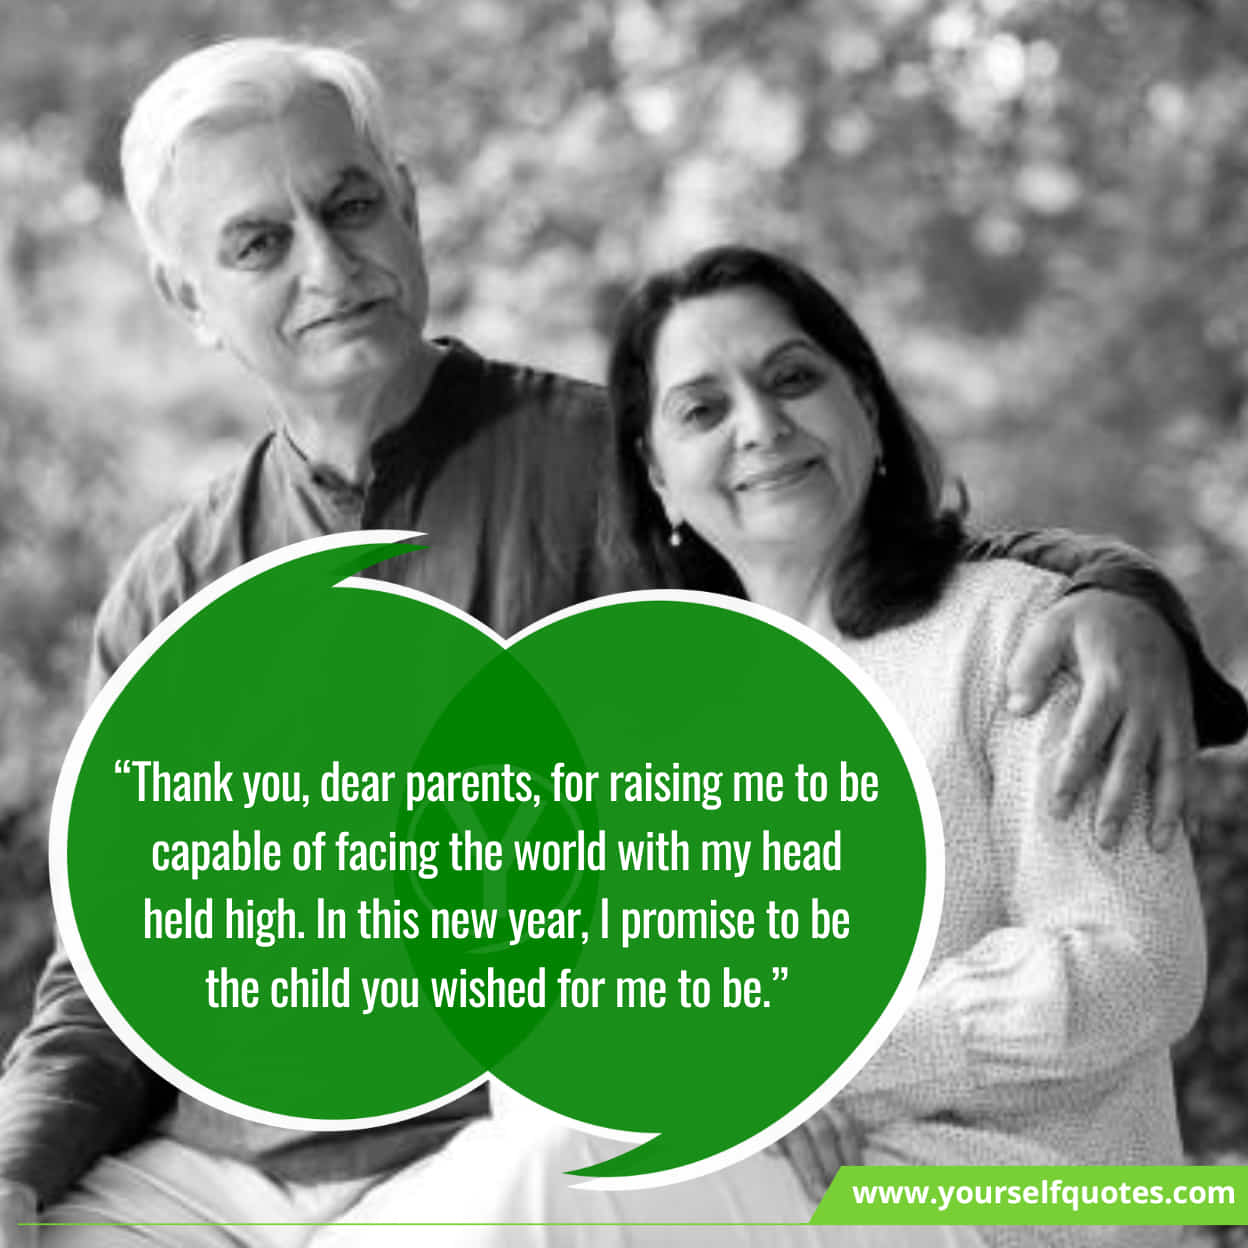 New Year Heart-Warming Wishes for Parents